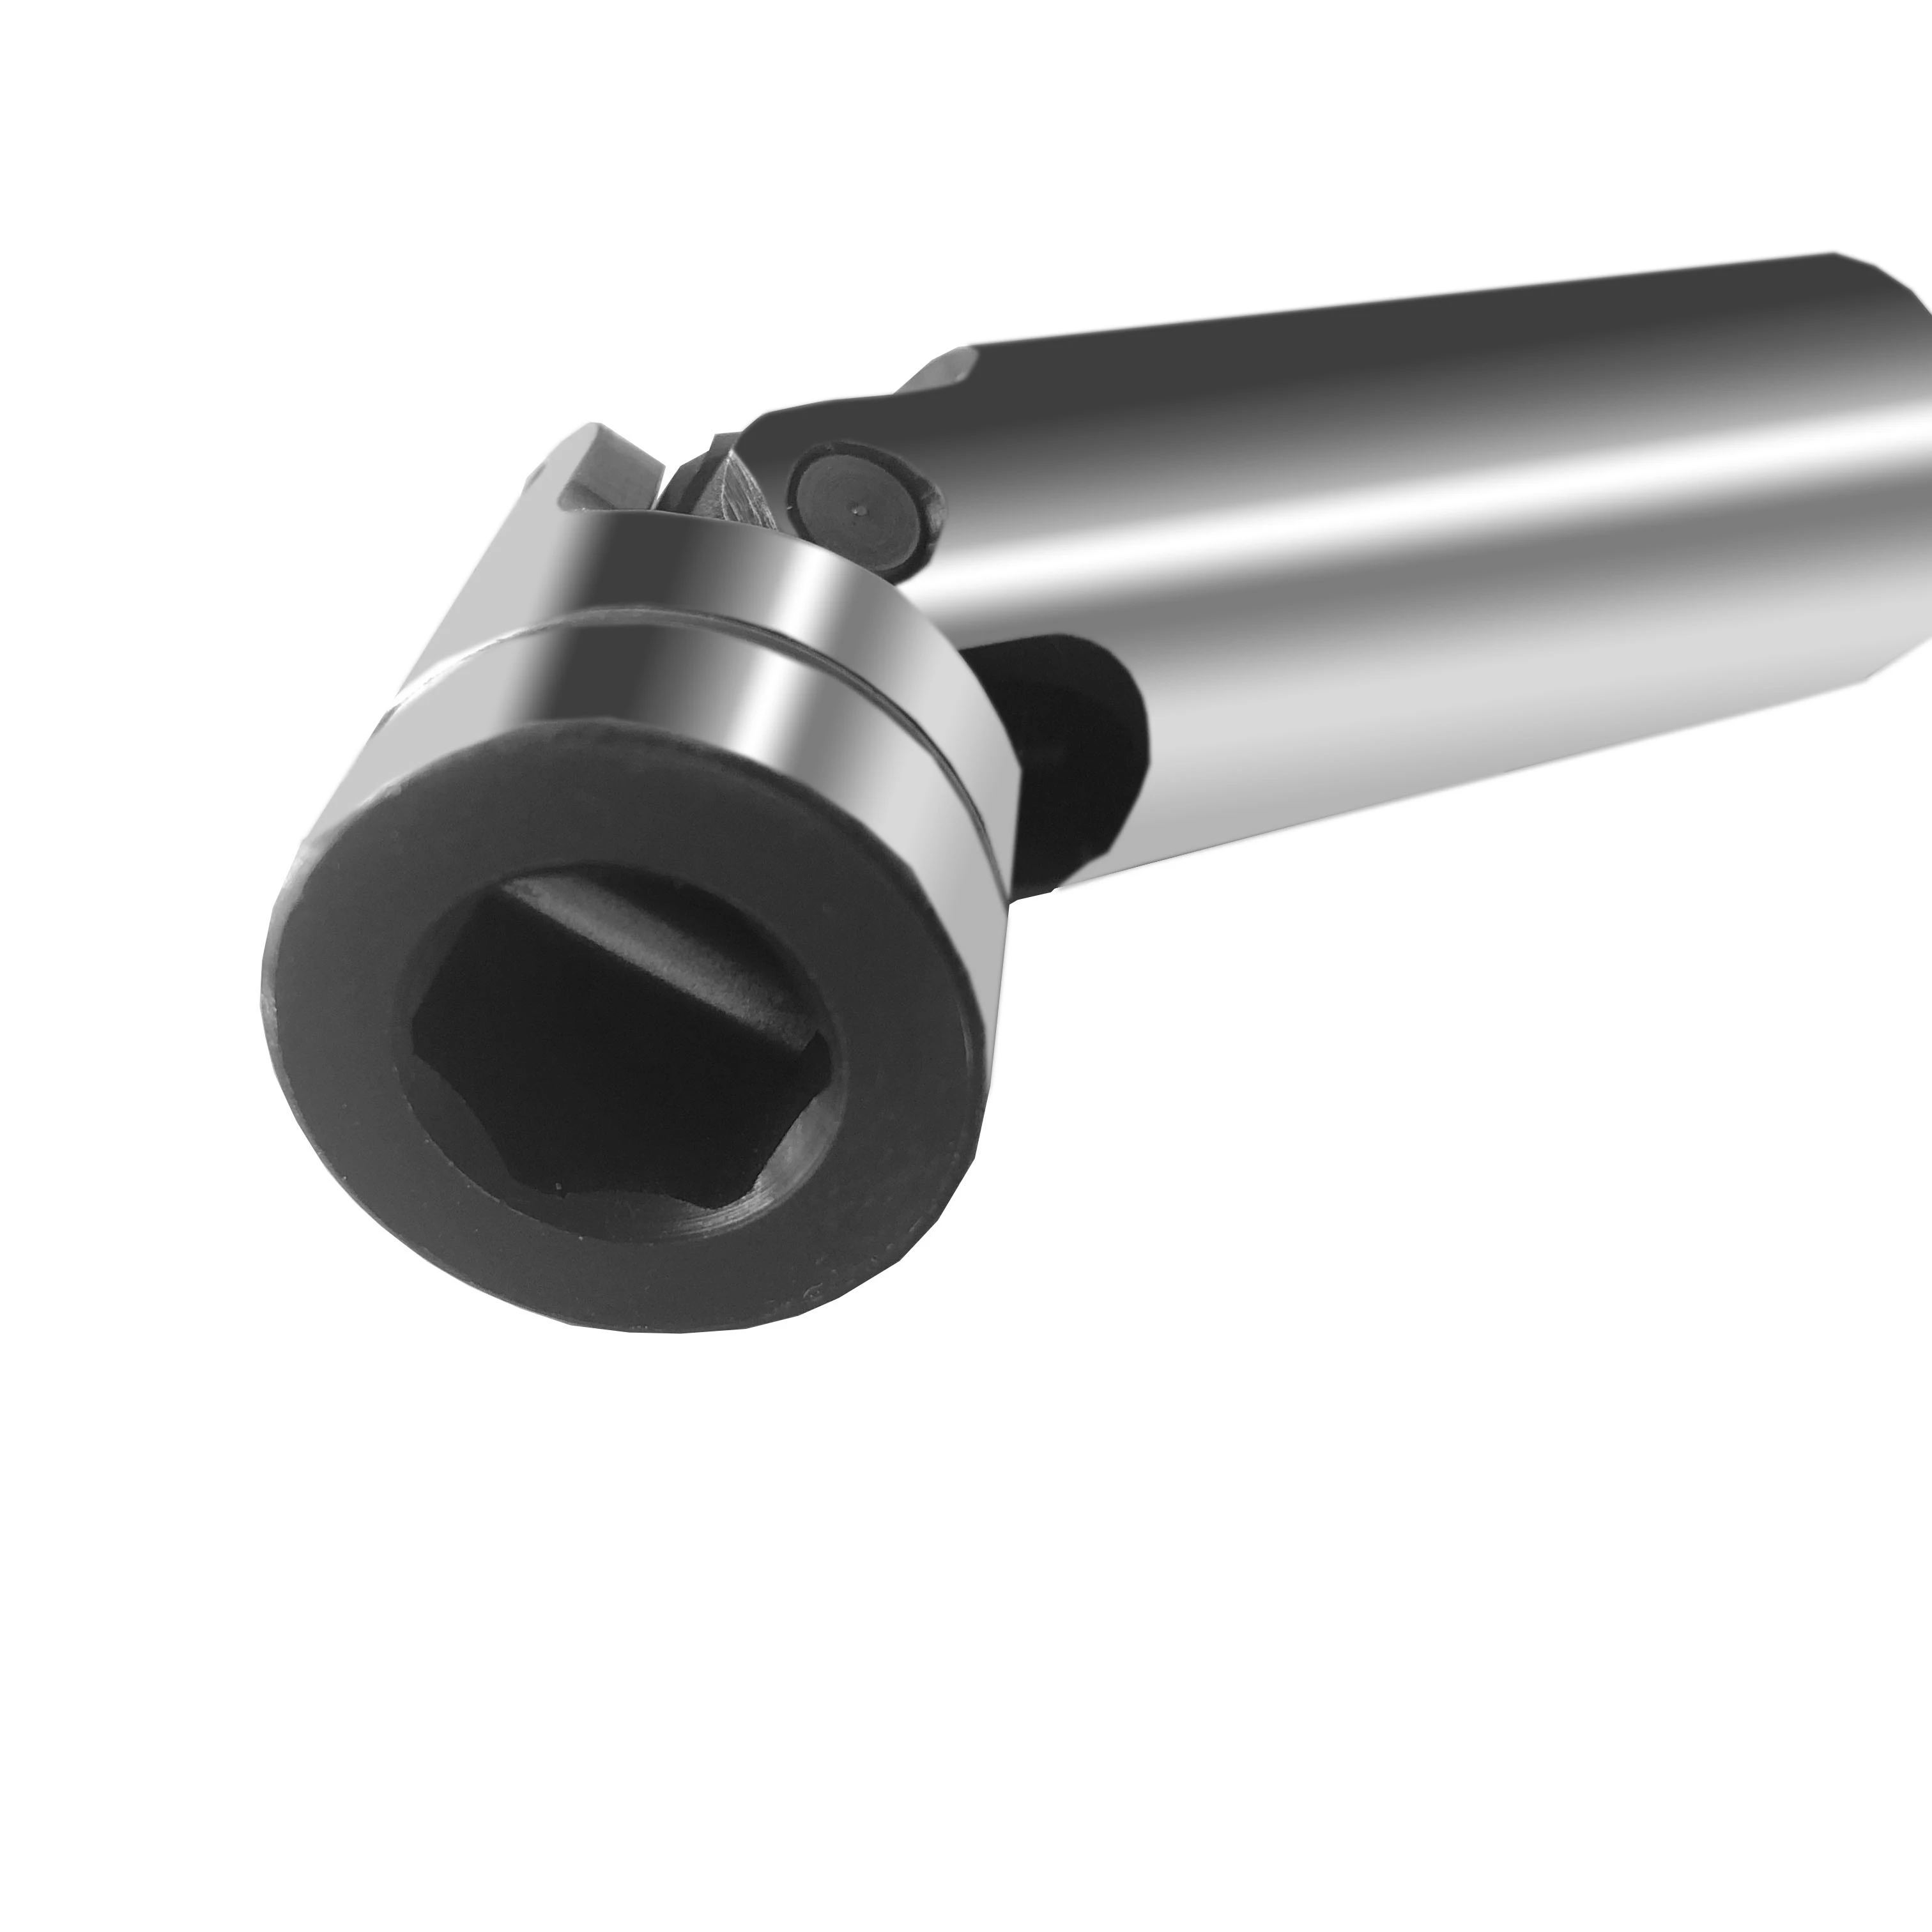 OEM quality power cross shaft universal joint coupling precision anti-wear universal coupling